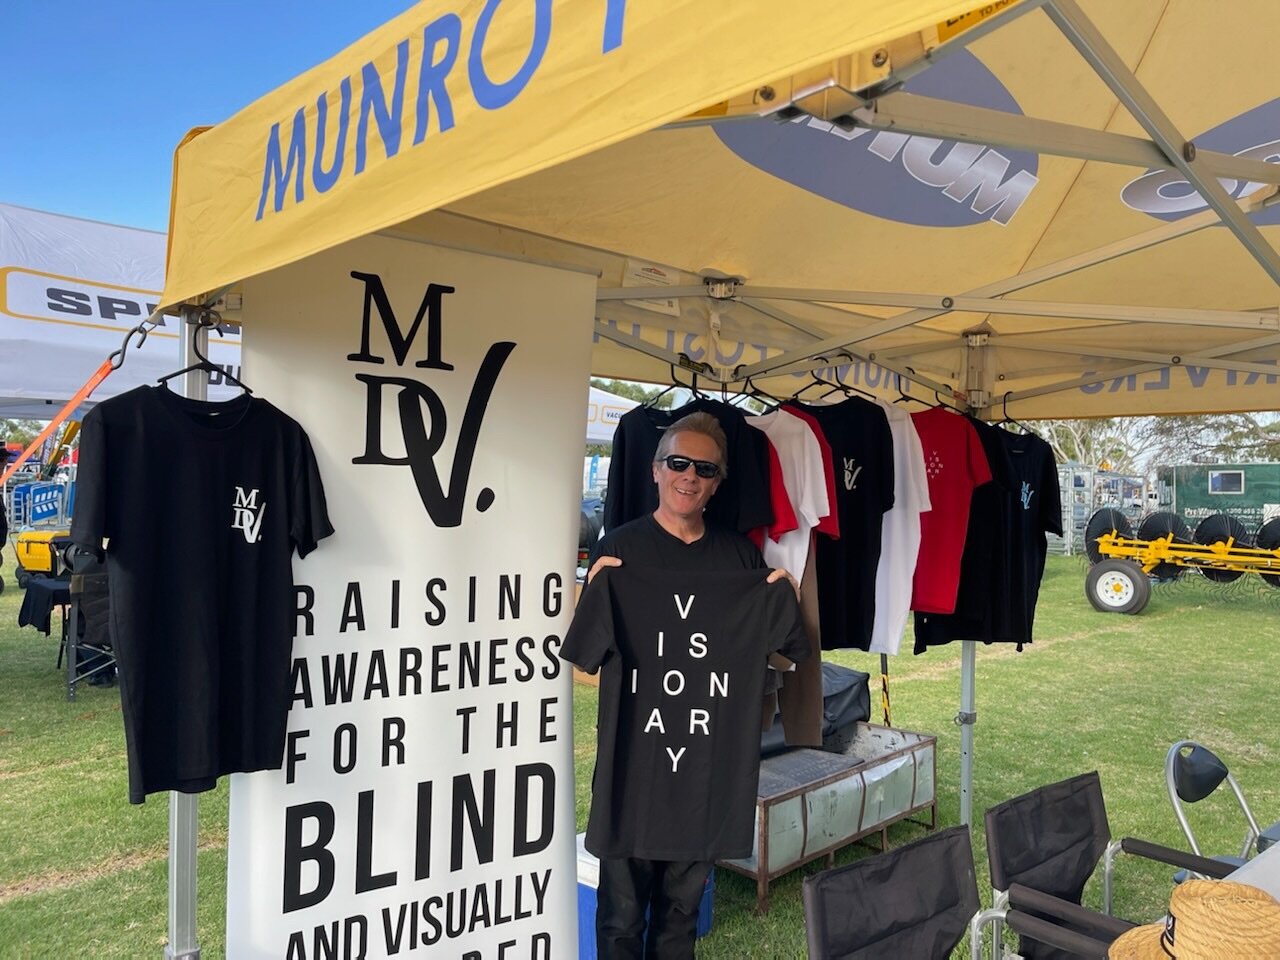 G&rsquo;day everyone, Today Mum &amp; Dad are set up at the South East Field Days,  if your out &amp; about come say hi to Kim &amp; Craig 😃
MDV. - Raising awareness for the blind &amp; visually impaired.

📍 Located at Rex Stotten Machinery Sales s